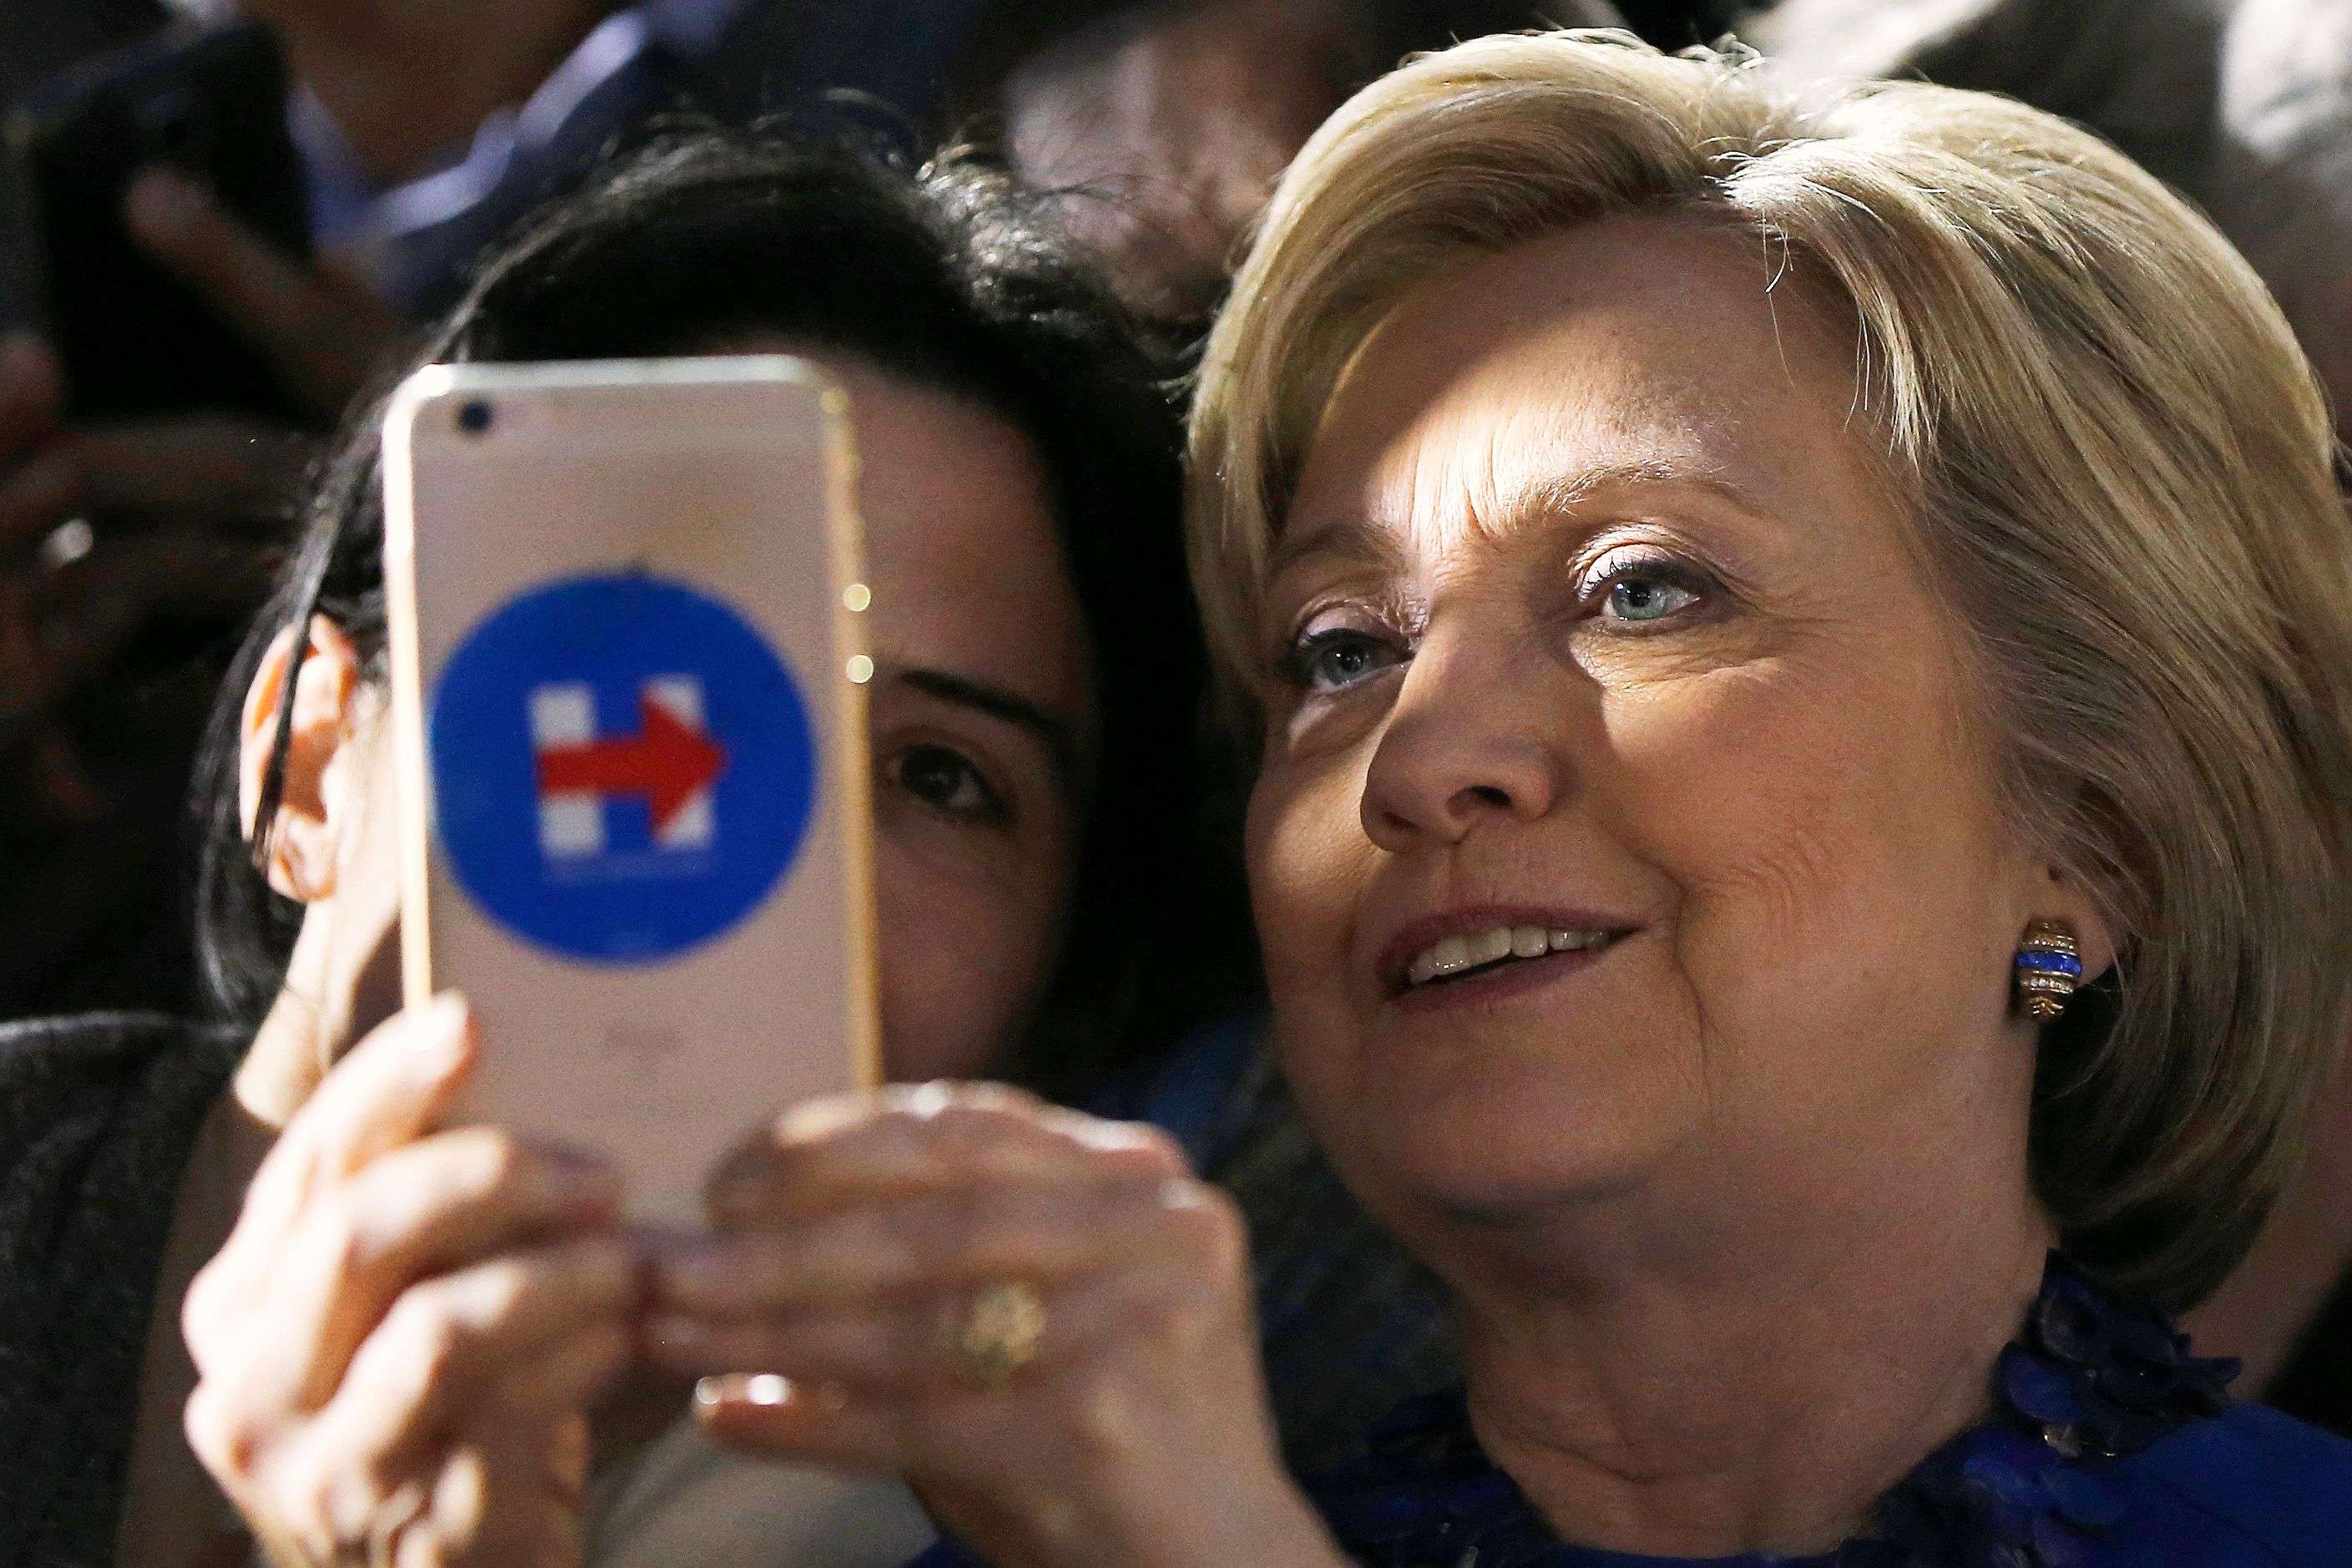 Democratic presidential candidate Hillary Clinton takes a photo with attendees during a campaign stop, Monday, April 25, 2016, at City Hall in Philadelphia. (AP Photo/Matt Rourke)